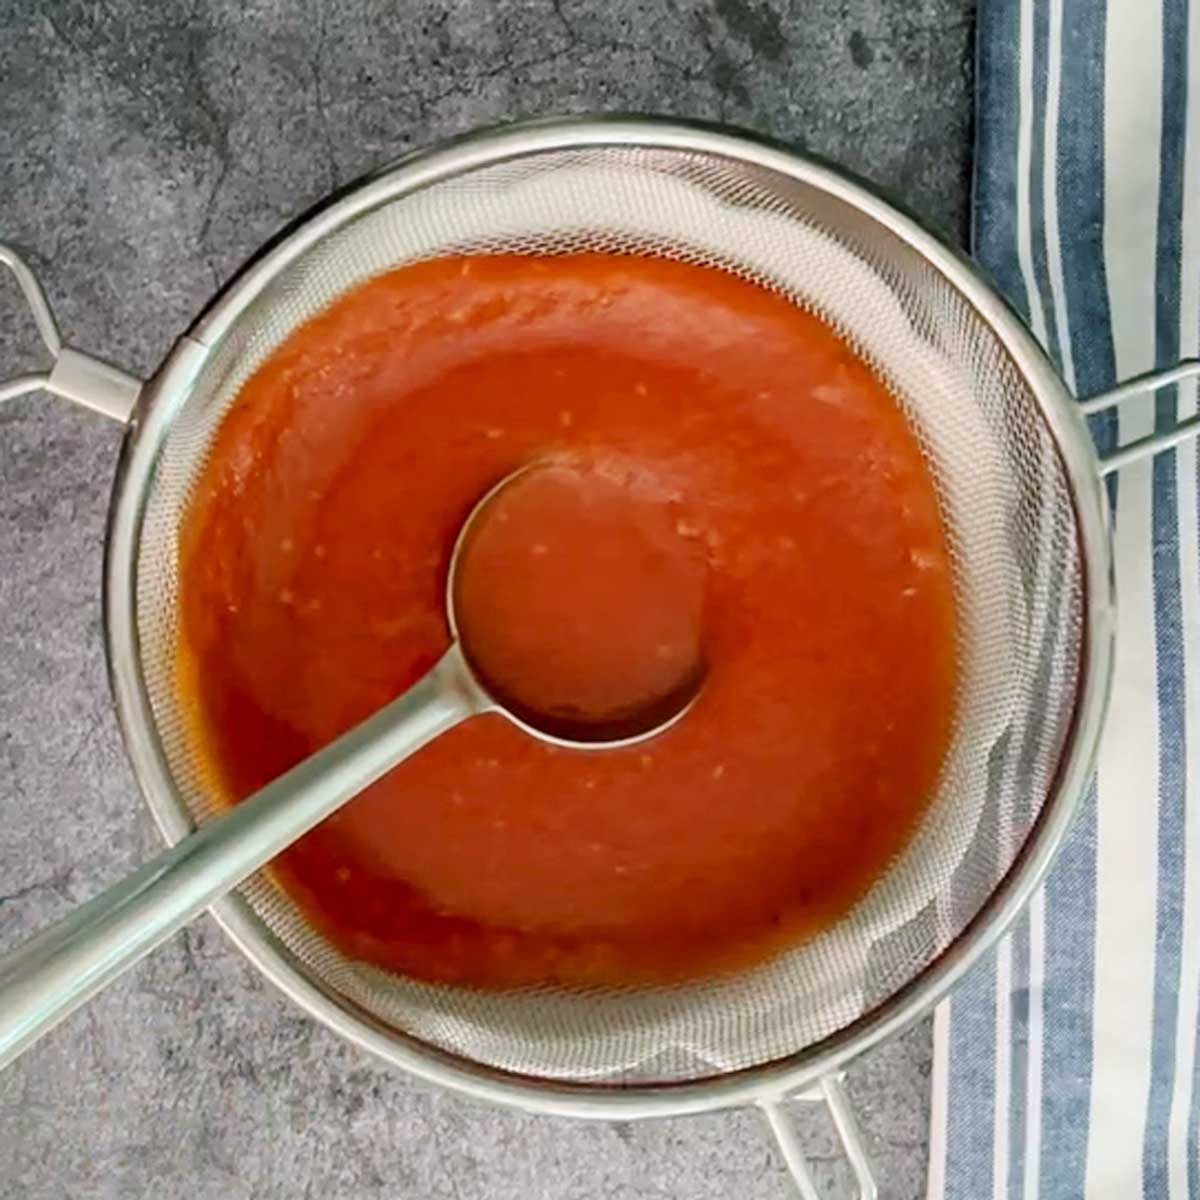 Straining Tomato ketchup blended ingredients.